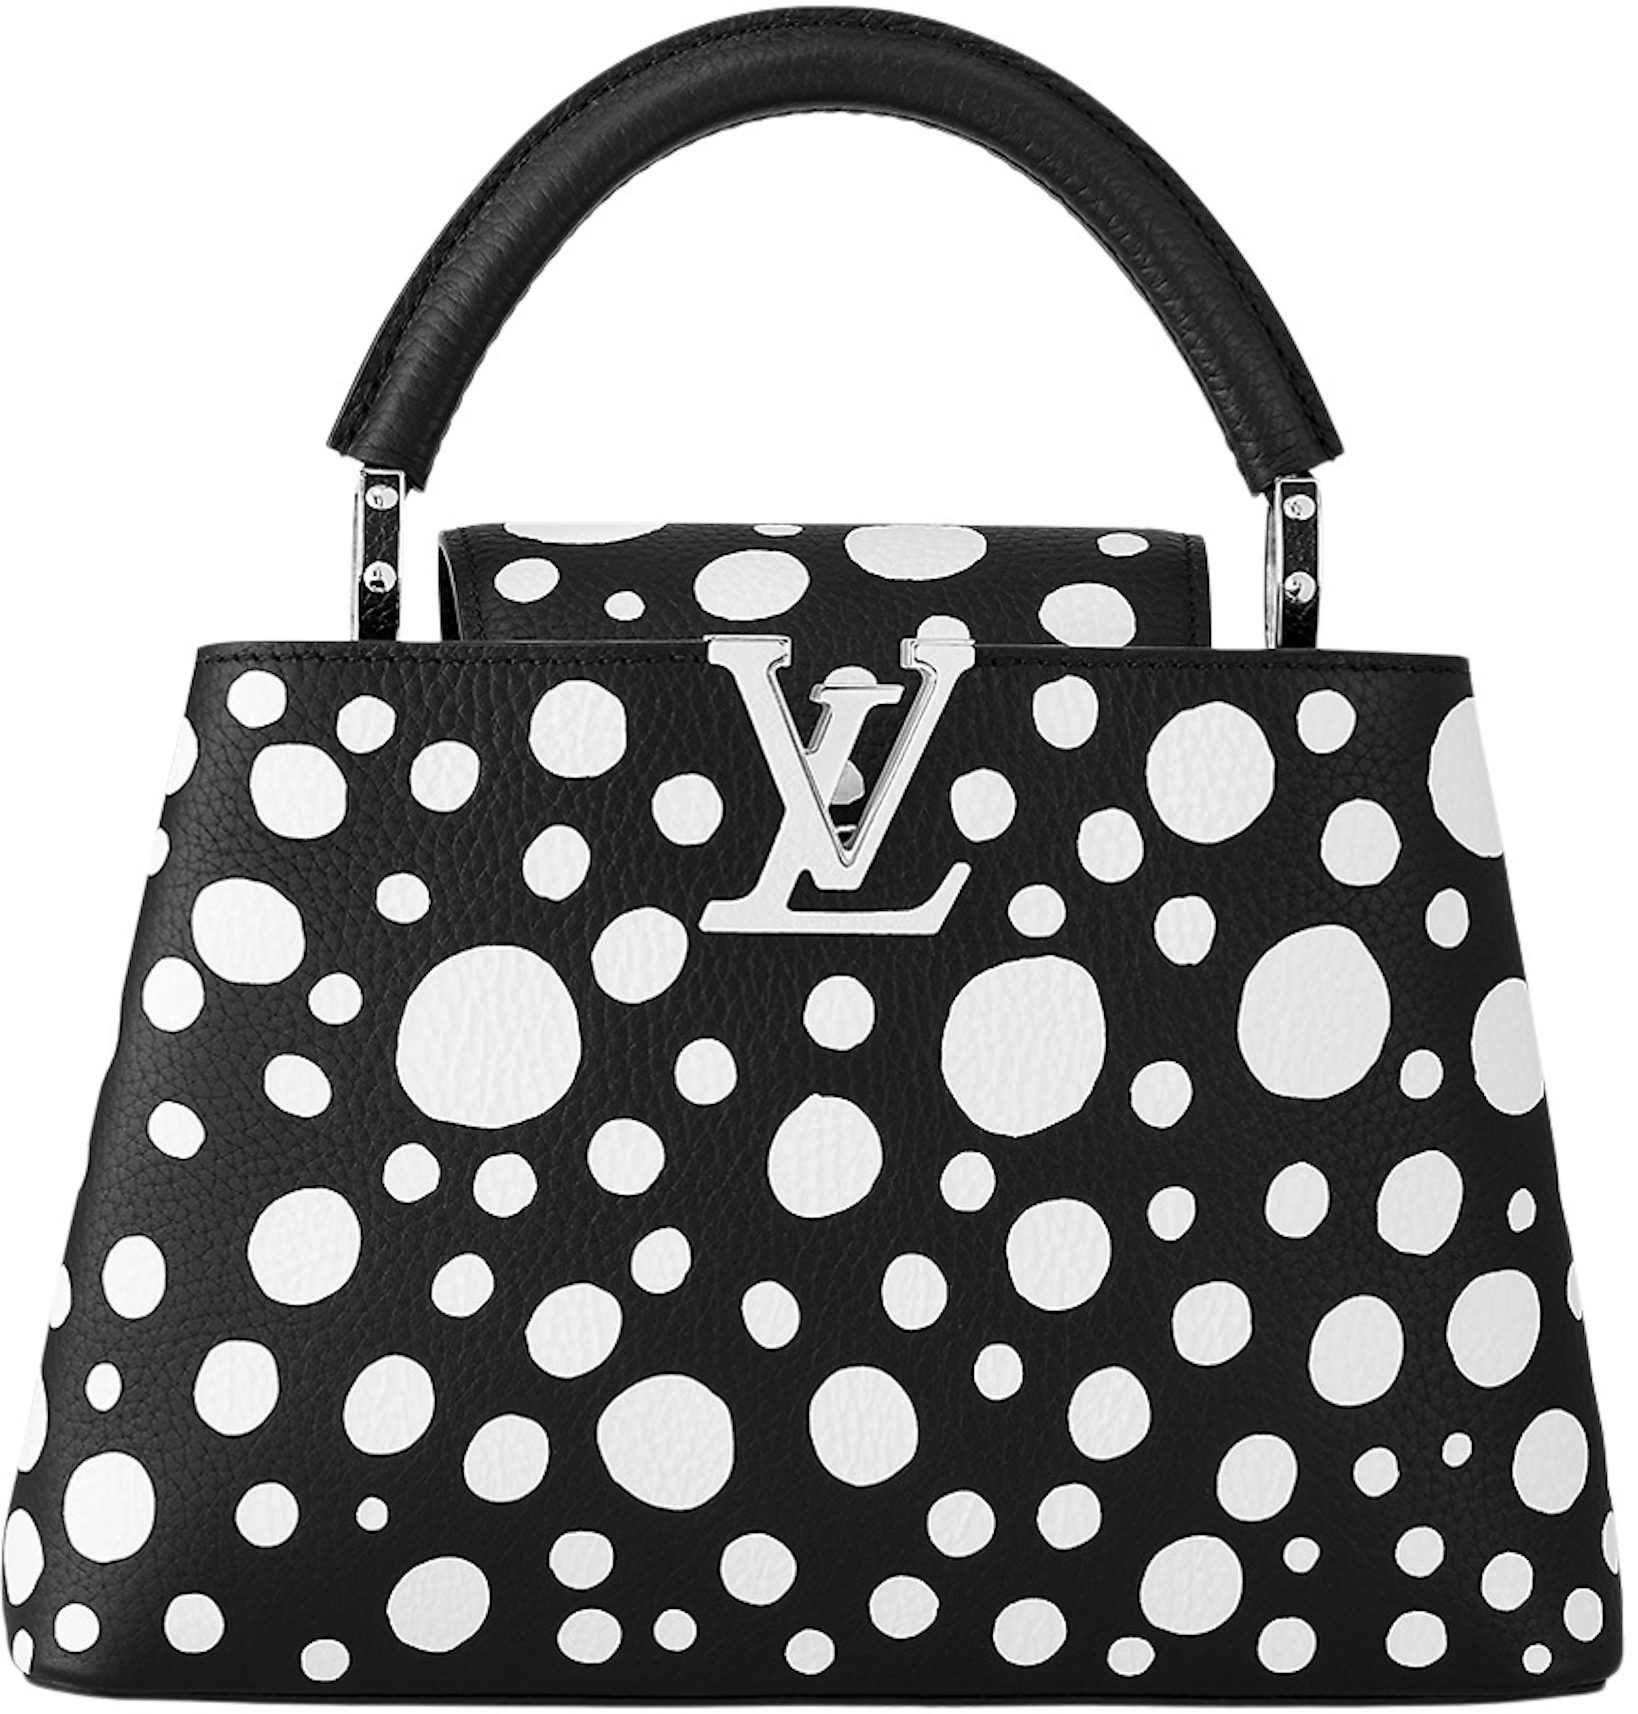 Louis Vuitton Bag Capucines BB Silver by Yayoi Kusama – YangGallery